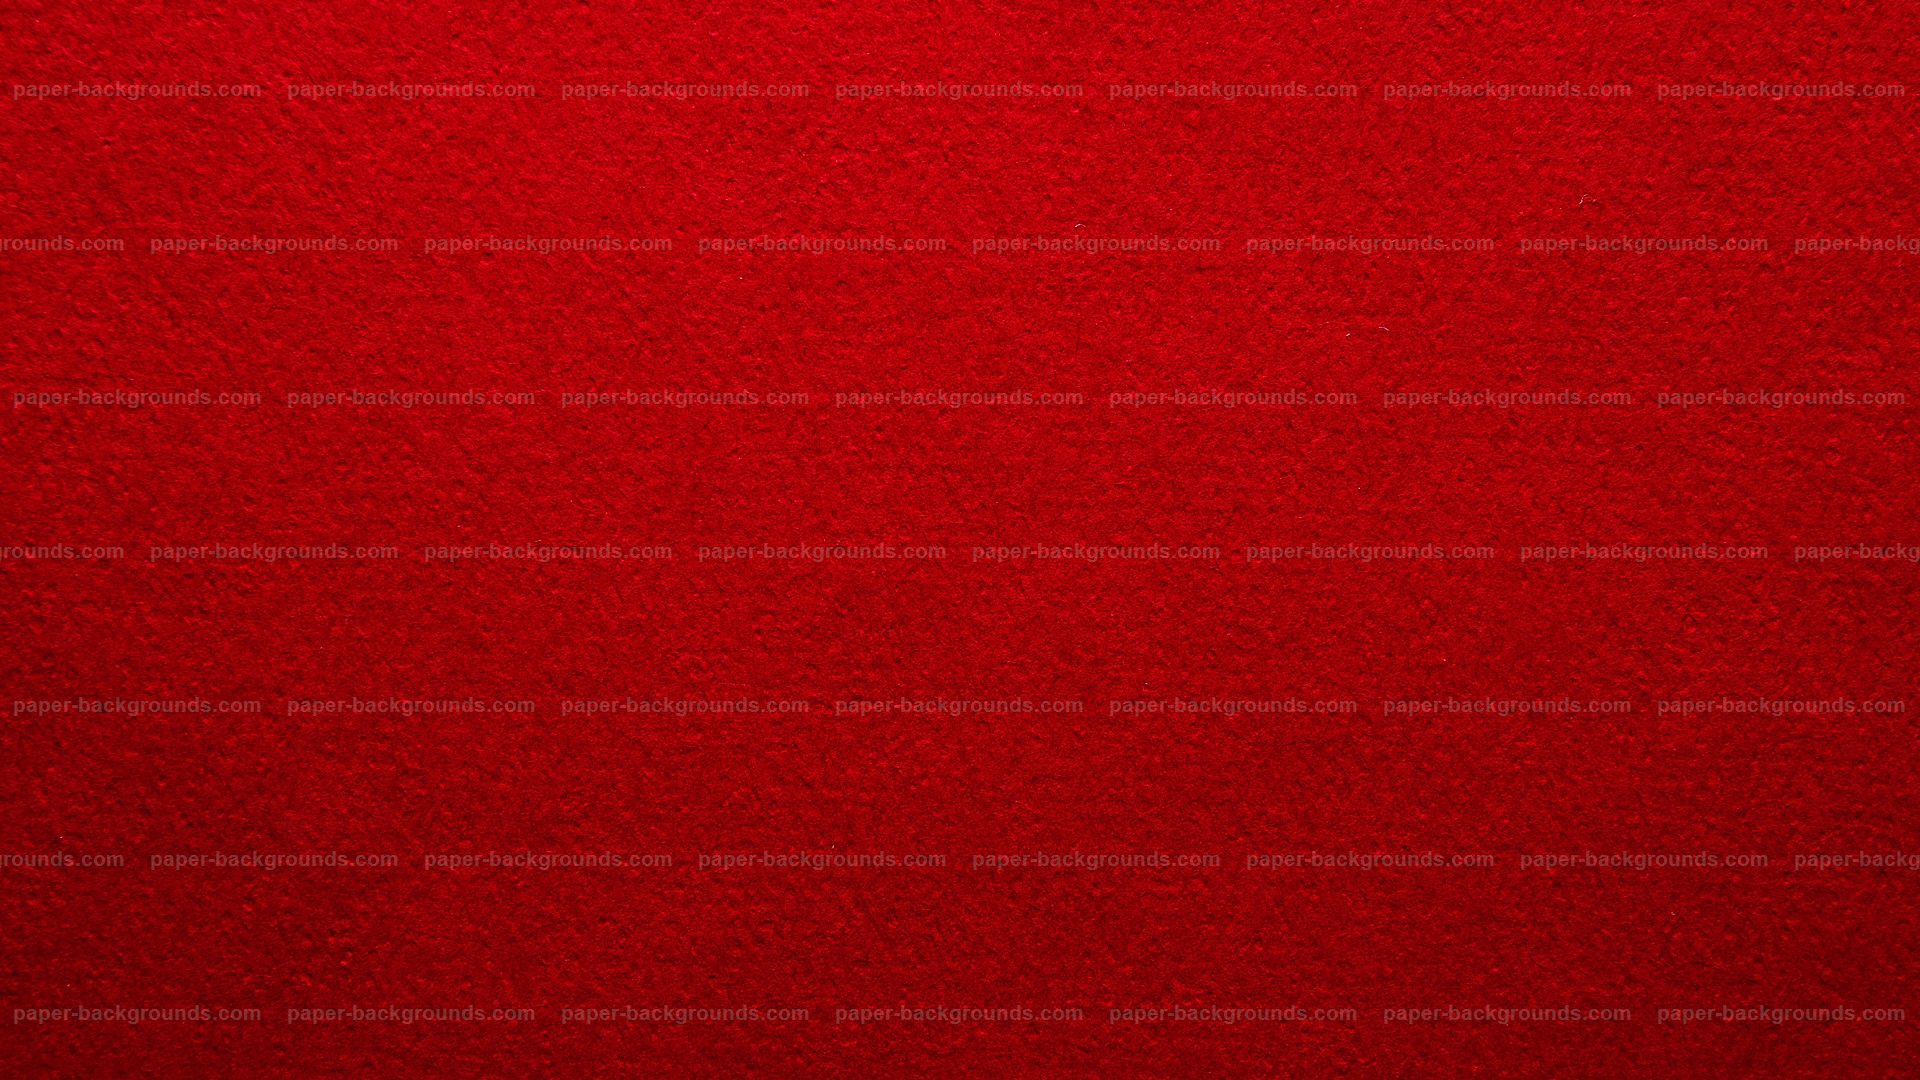 750 Red Texture Pictures  Download Free Images on Unsplash